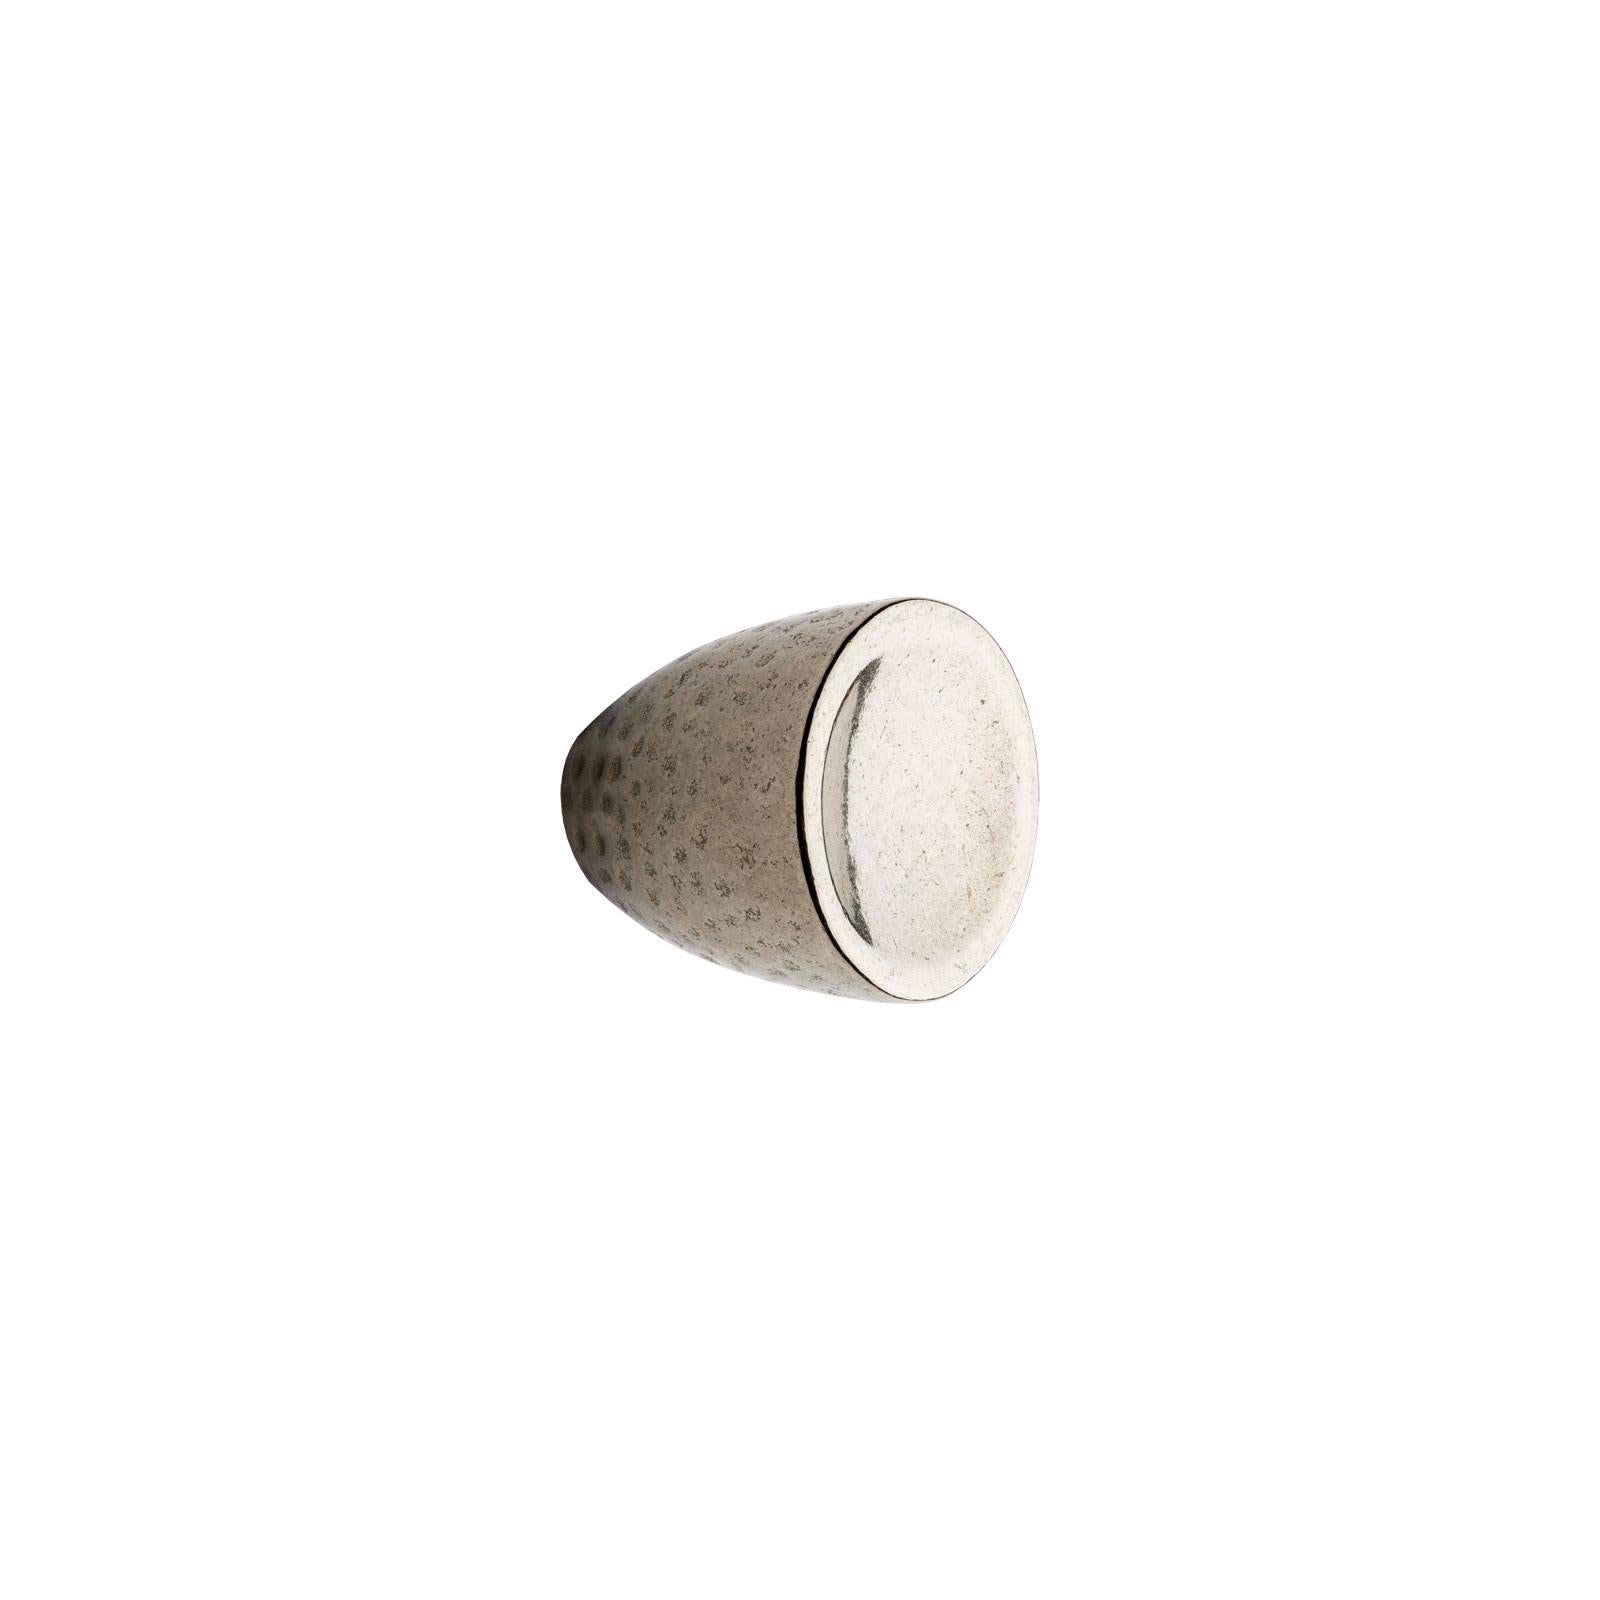 CK248 - 1 1/4" Cup Cabinet Knob - {{ show.name }}